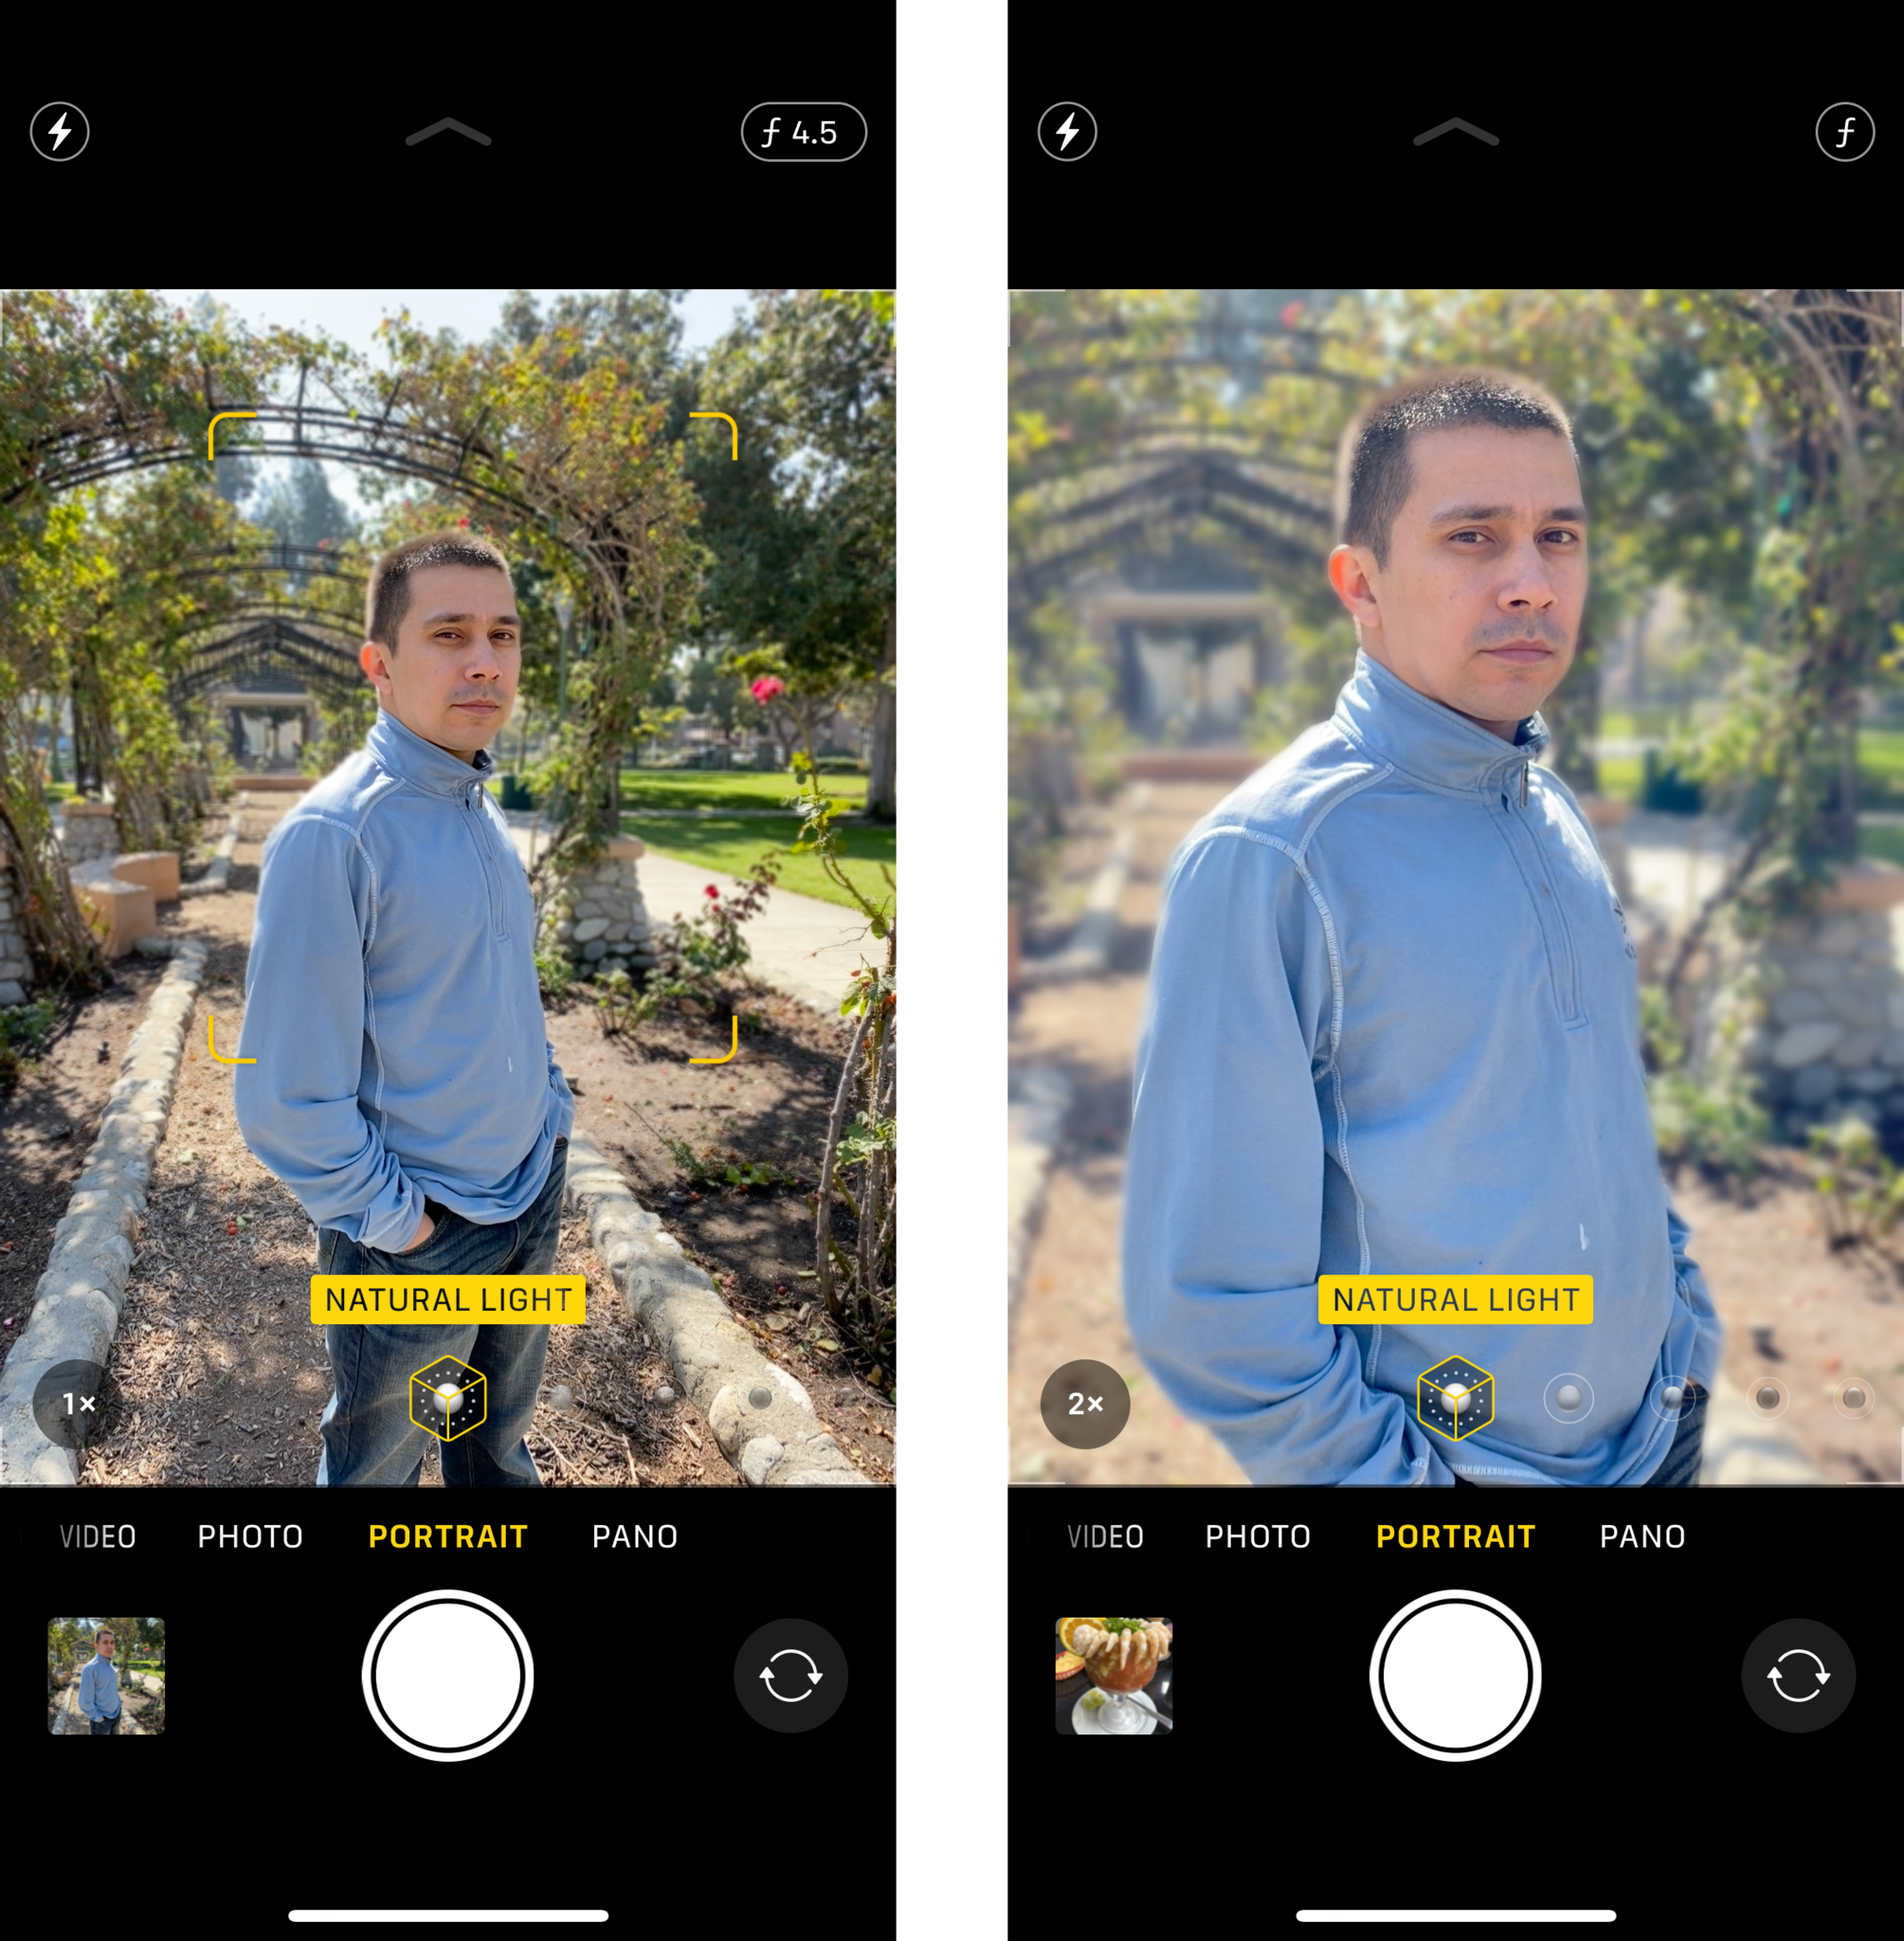 Wide and Telephoto side-by-side for Portrait mode